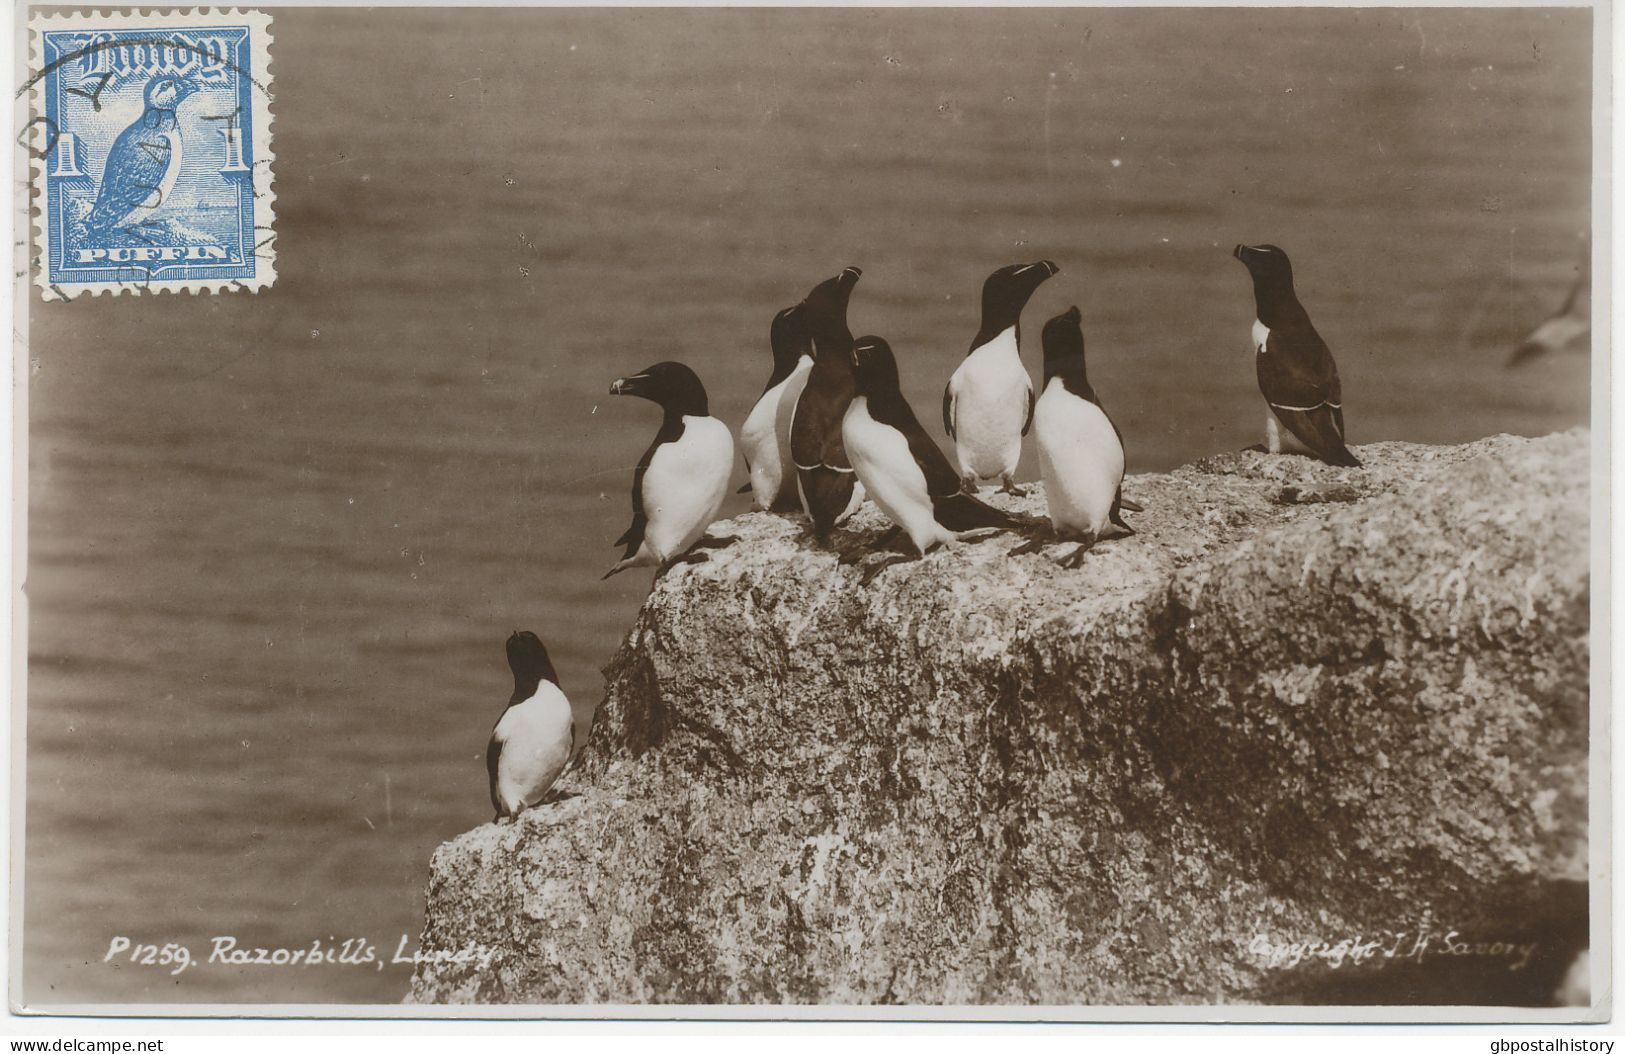 GB LUNDY 1949 1 Puffin Birds On Superb Commercially Used RP Postcard, Rare - Errors, Freaks & Oddities (EFOs